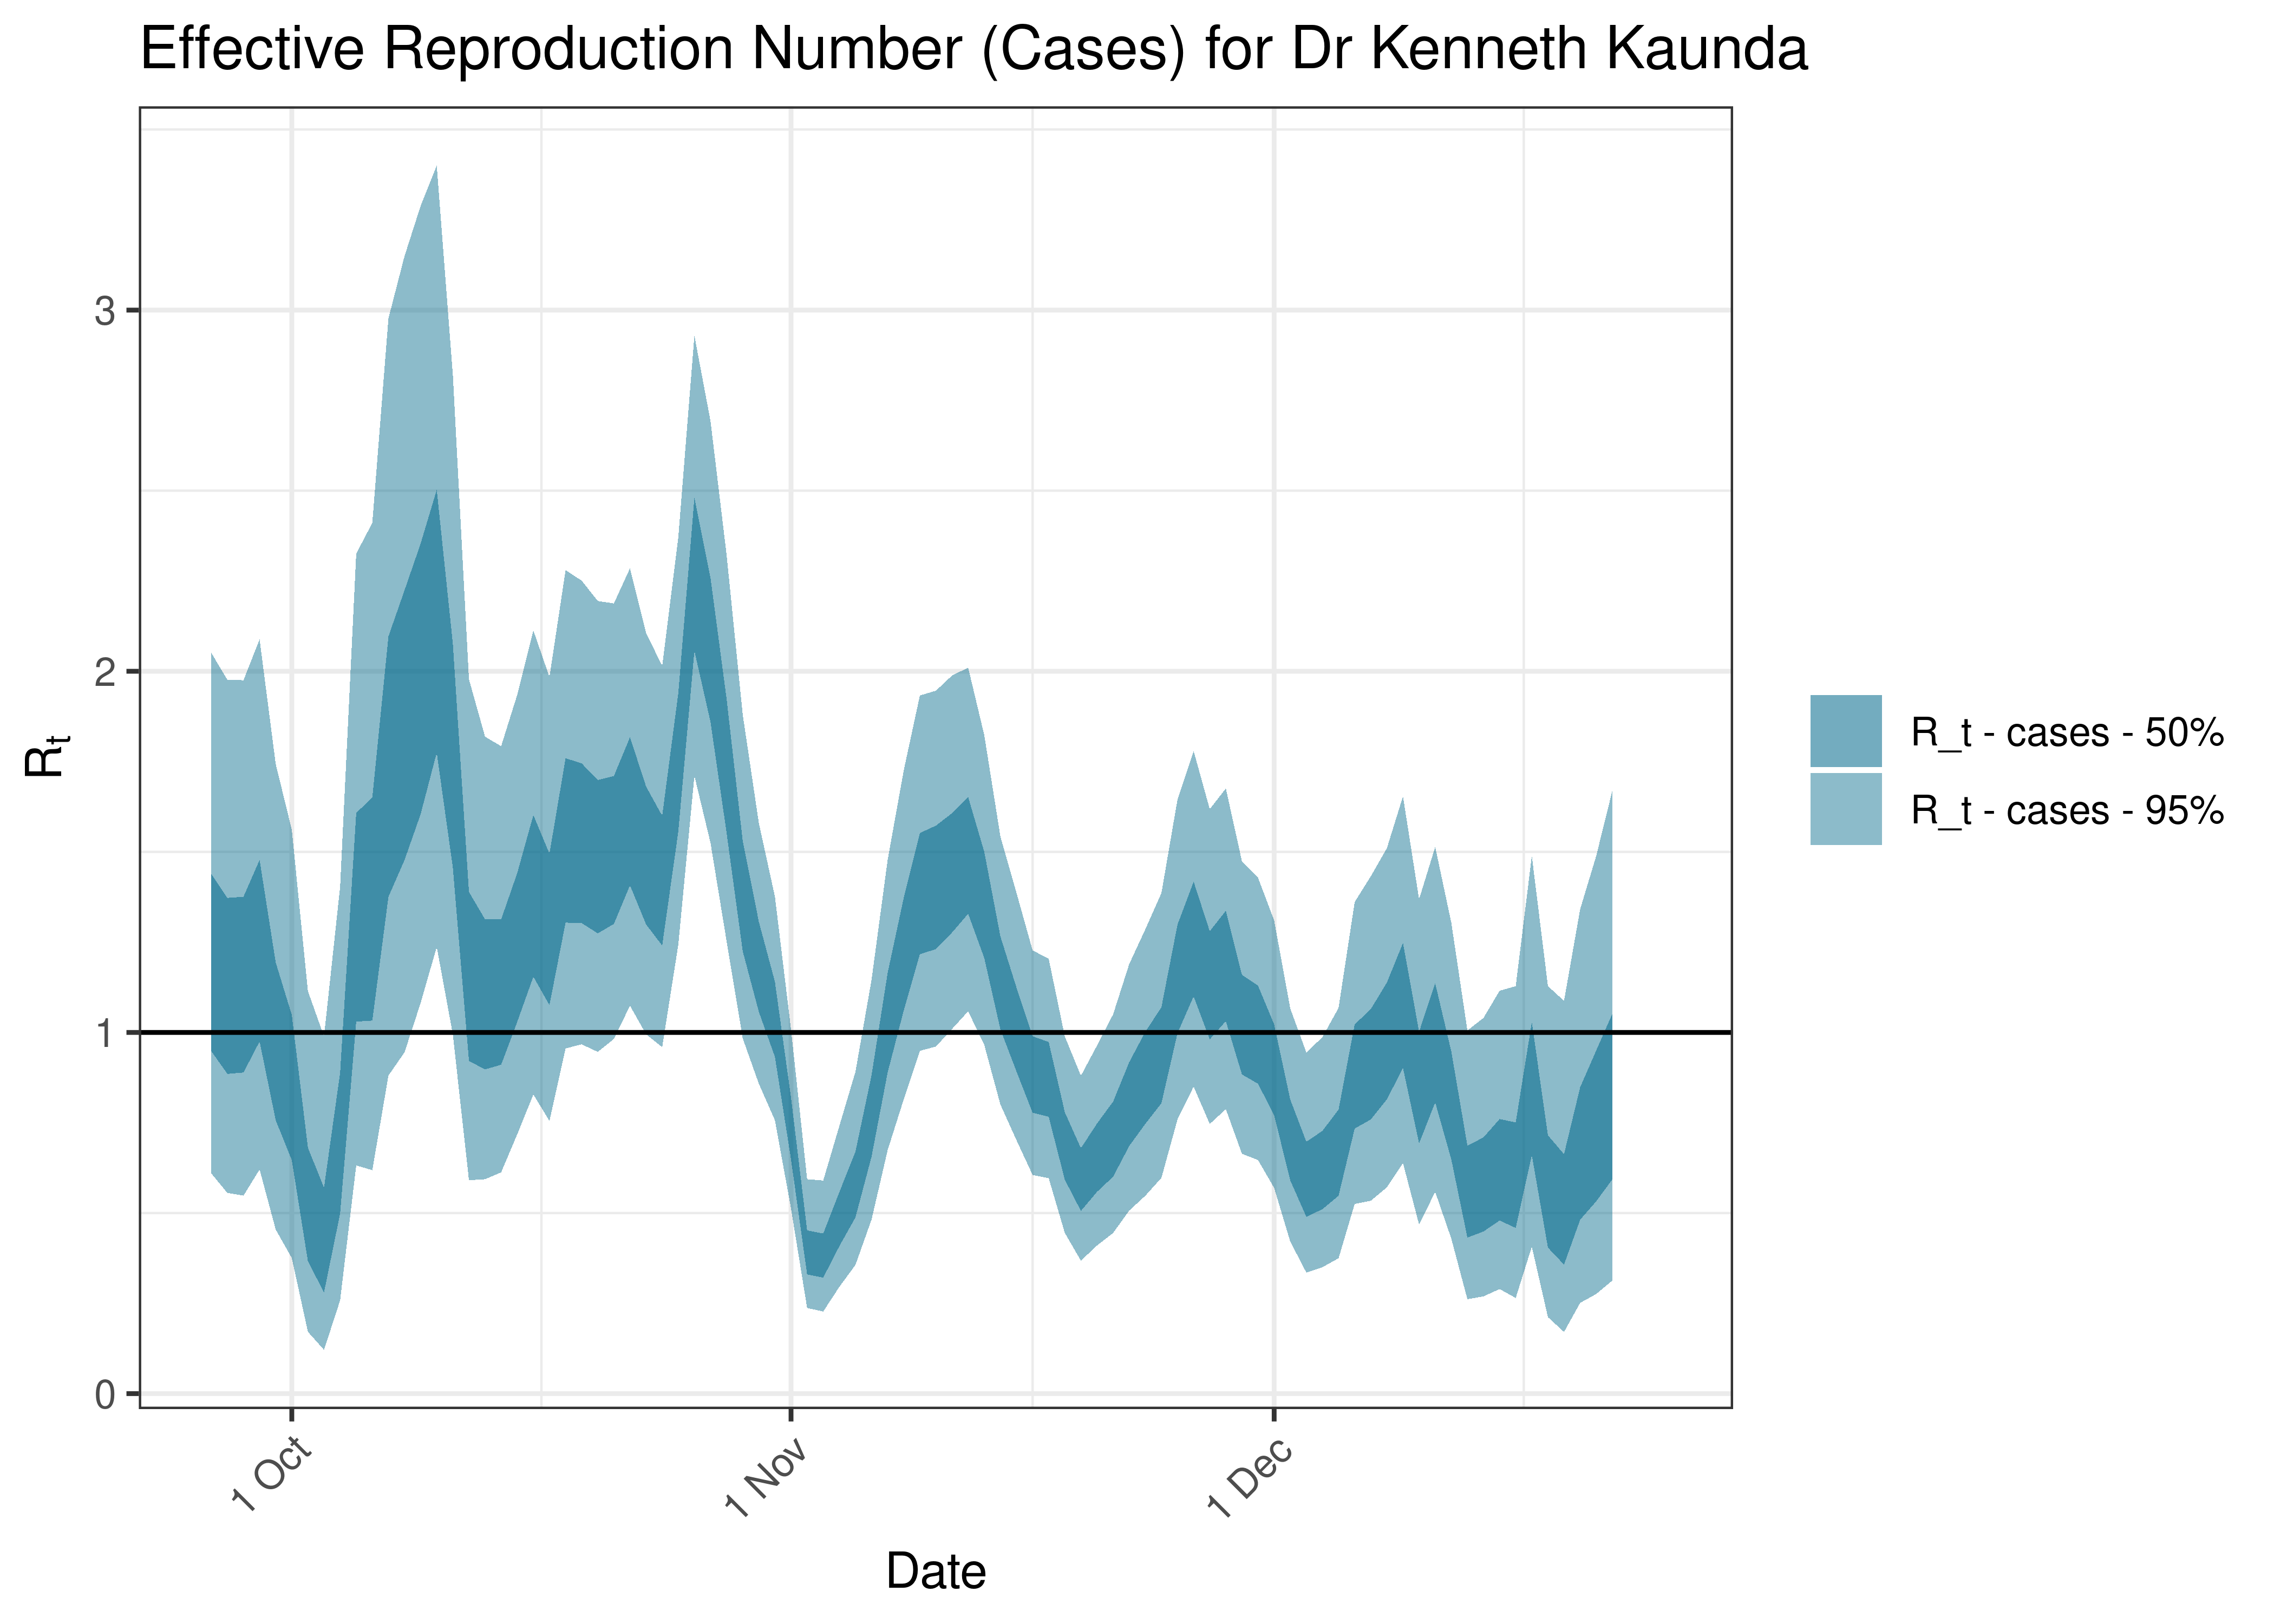 Estimated Effective Reproduction Number Based on Cases for Dr Kenneth Kaunda over last 90 days